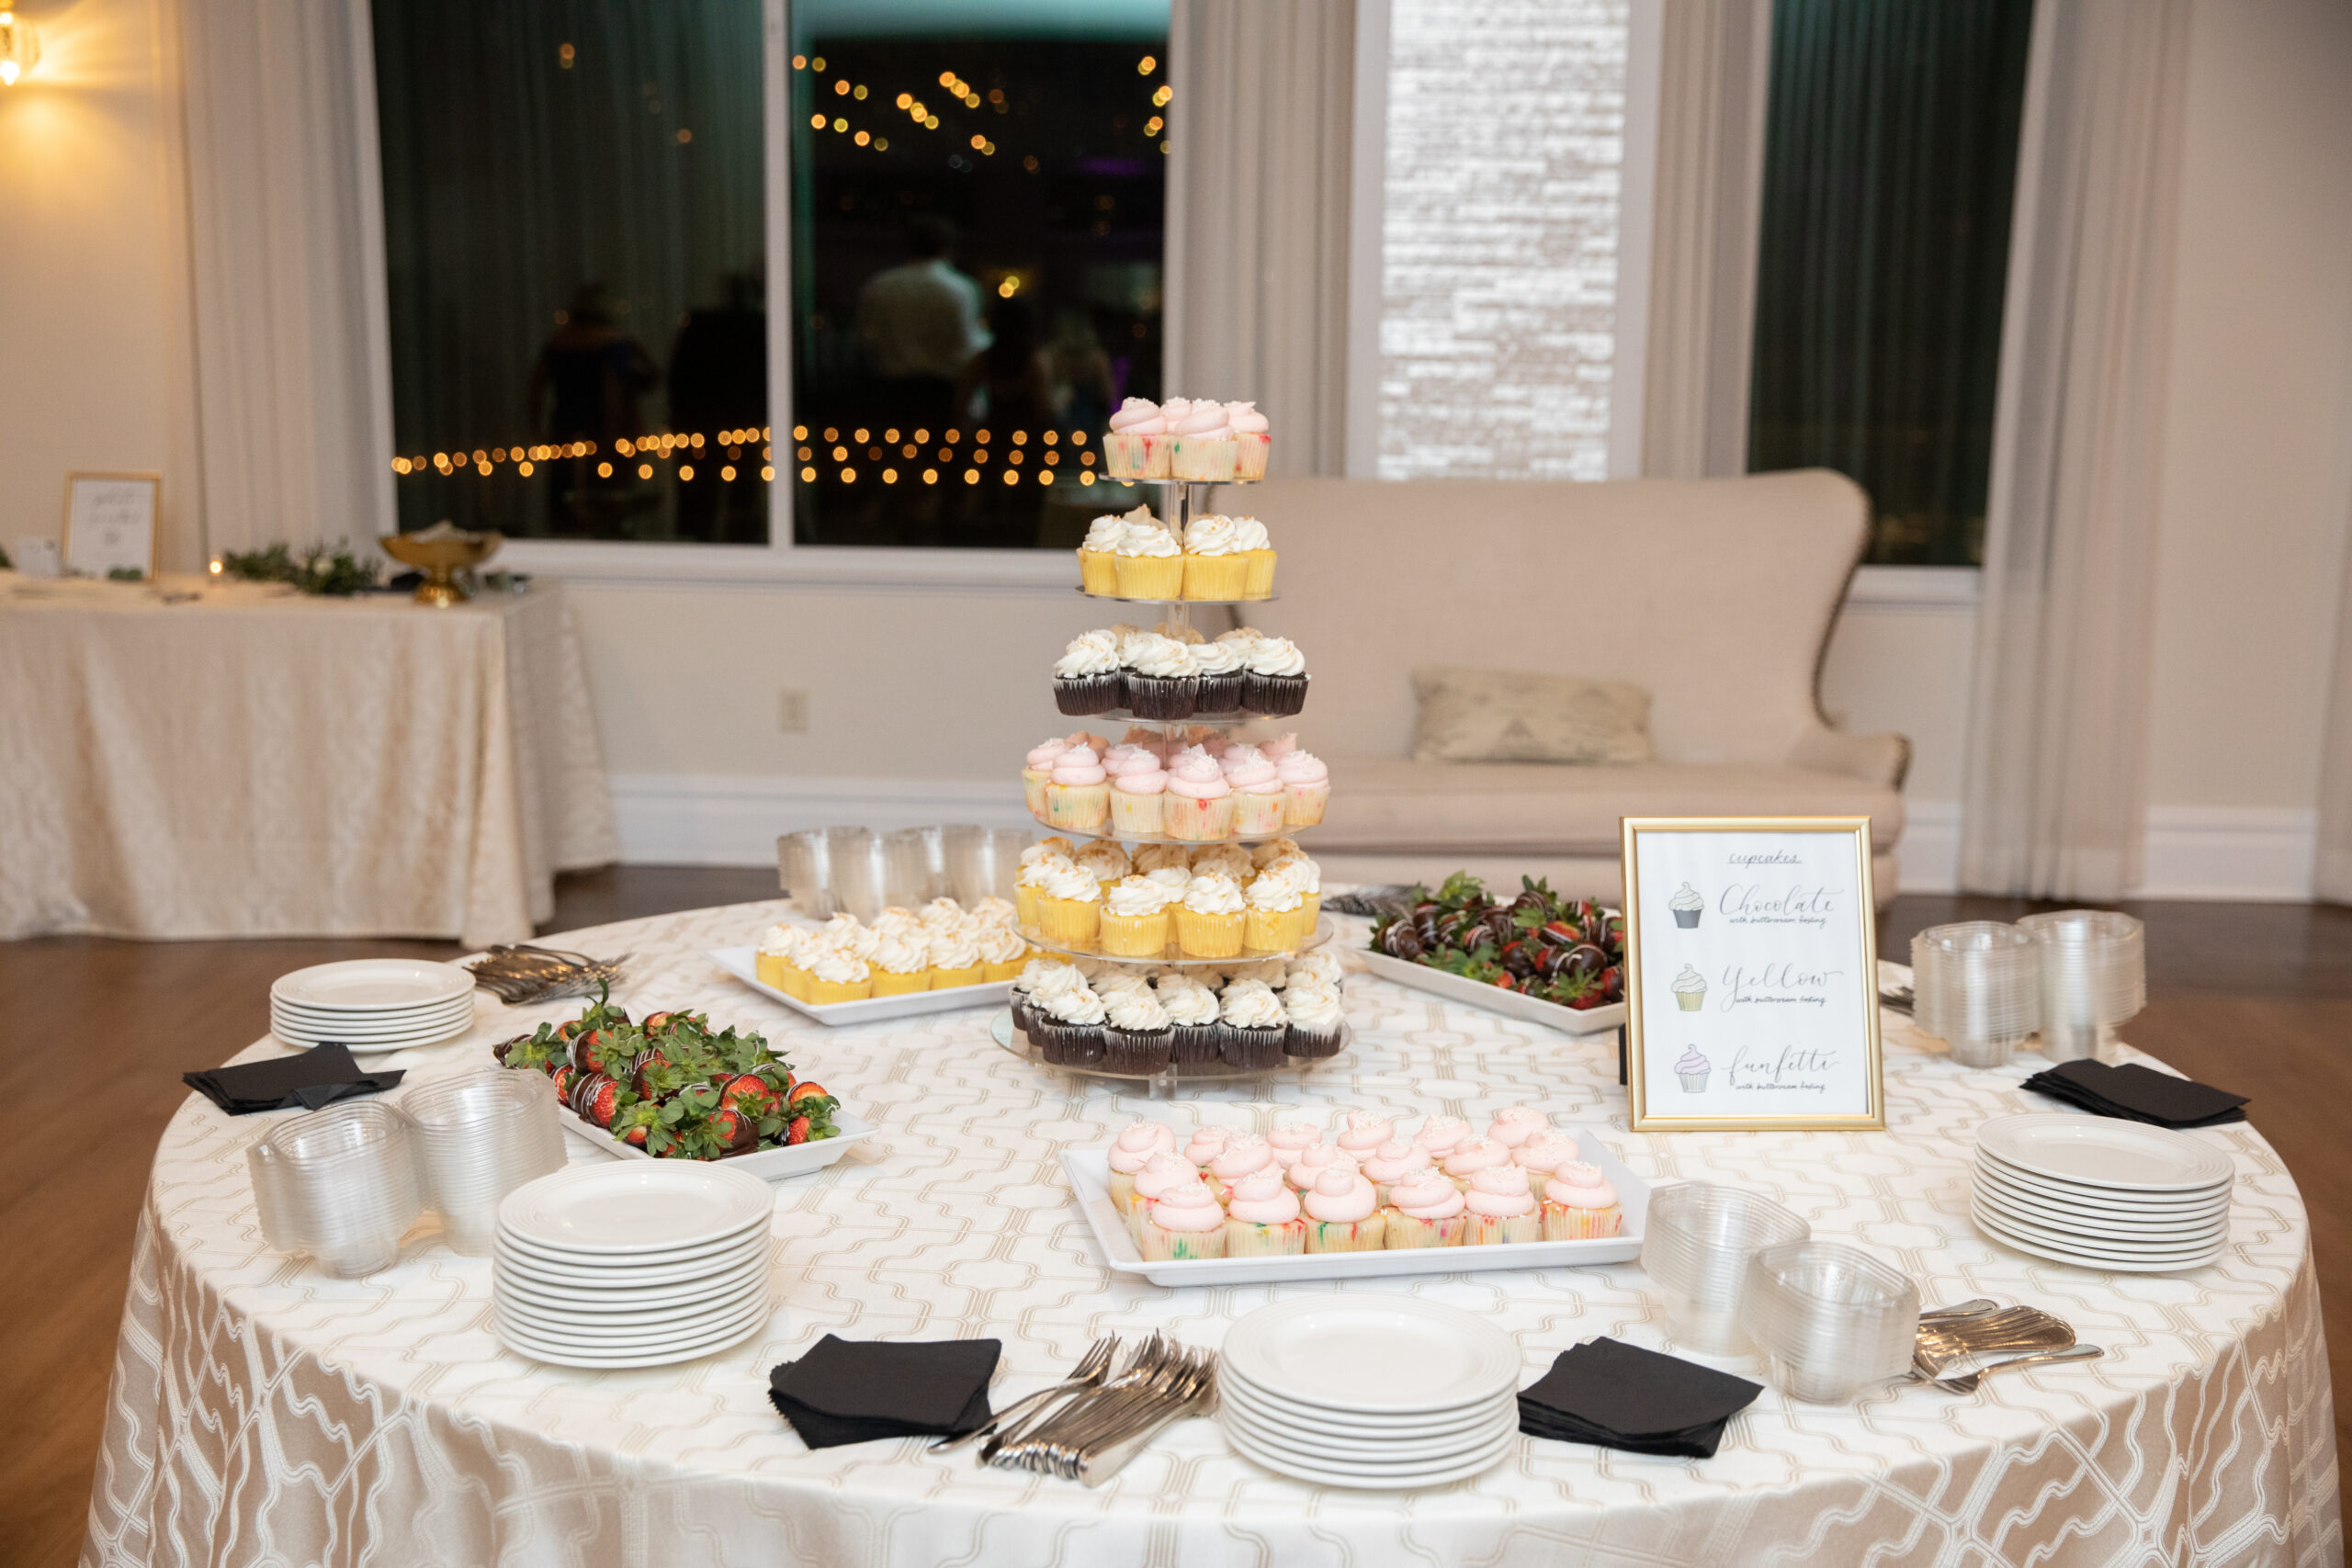 A cupcake tower is the centerpiece of the lounge area at the Atlantic Resort in the Newport Wyndham Hotel. 